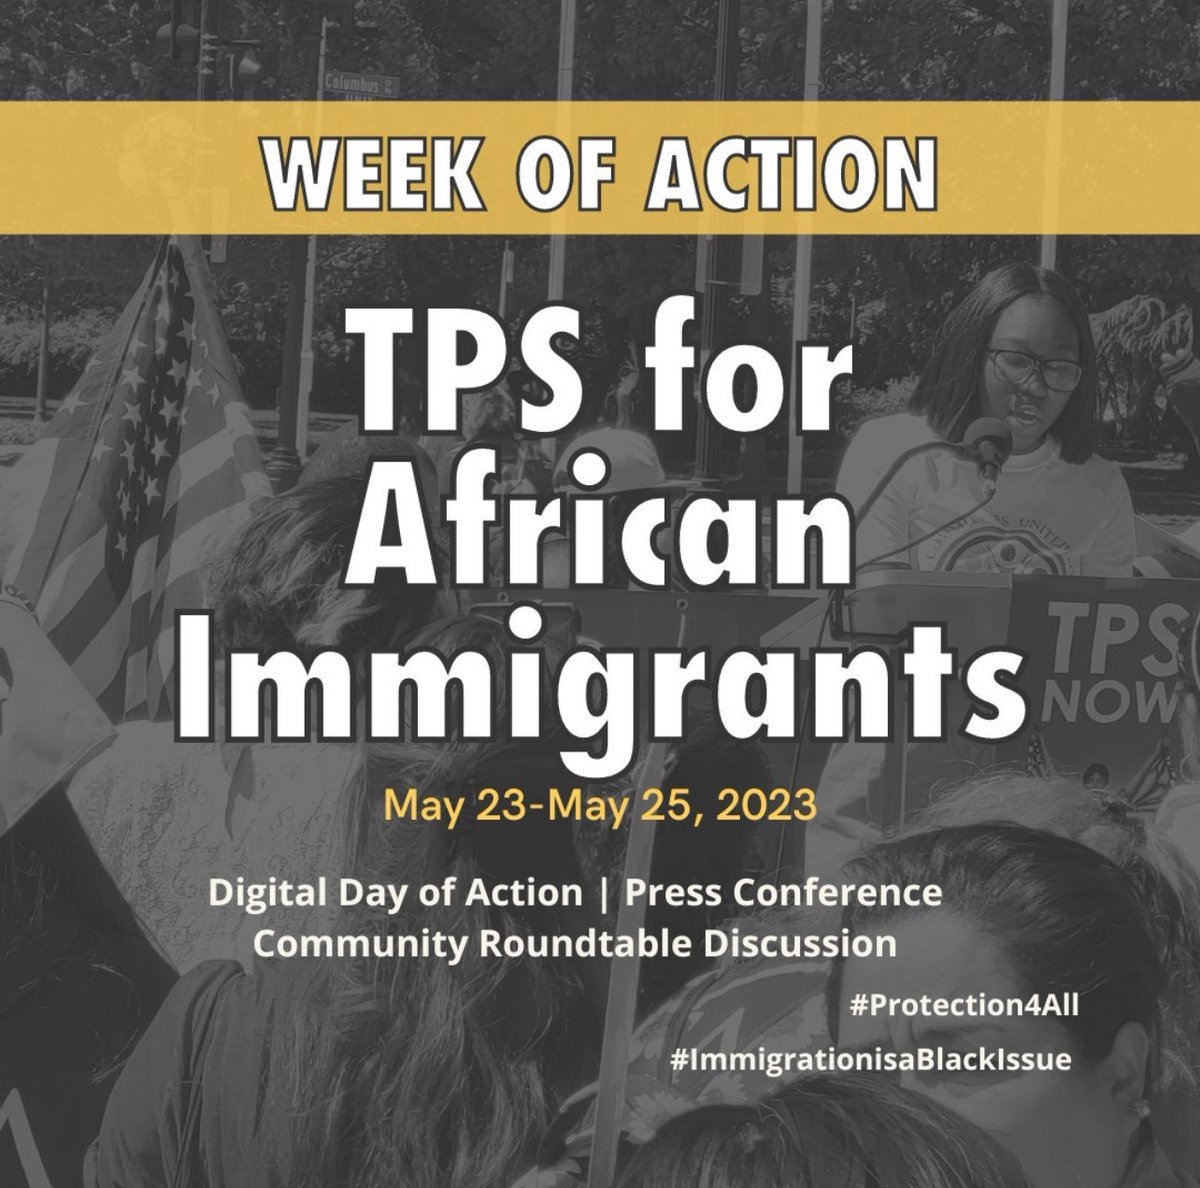 Ukraine was granted TPS just 8 days after the war began, yet we rarely see such swift action for Black immigrants. As advocates for immigrant rights, we demand better for African communities.@AfricansUS 
#ImmigrationIsABlackIssue #Protection4All